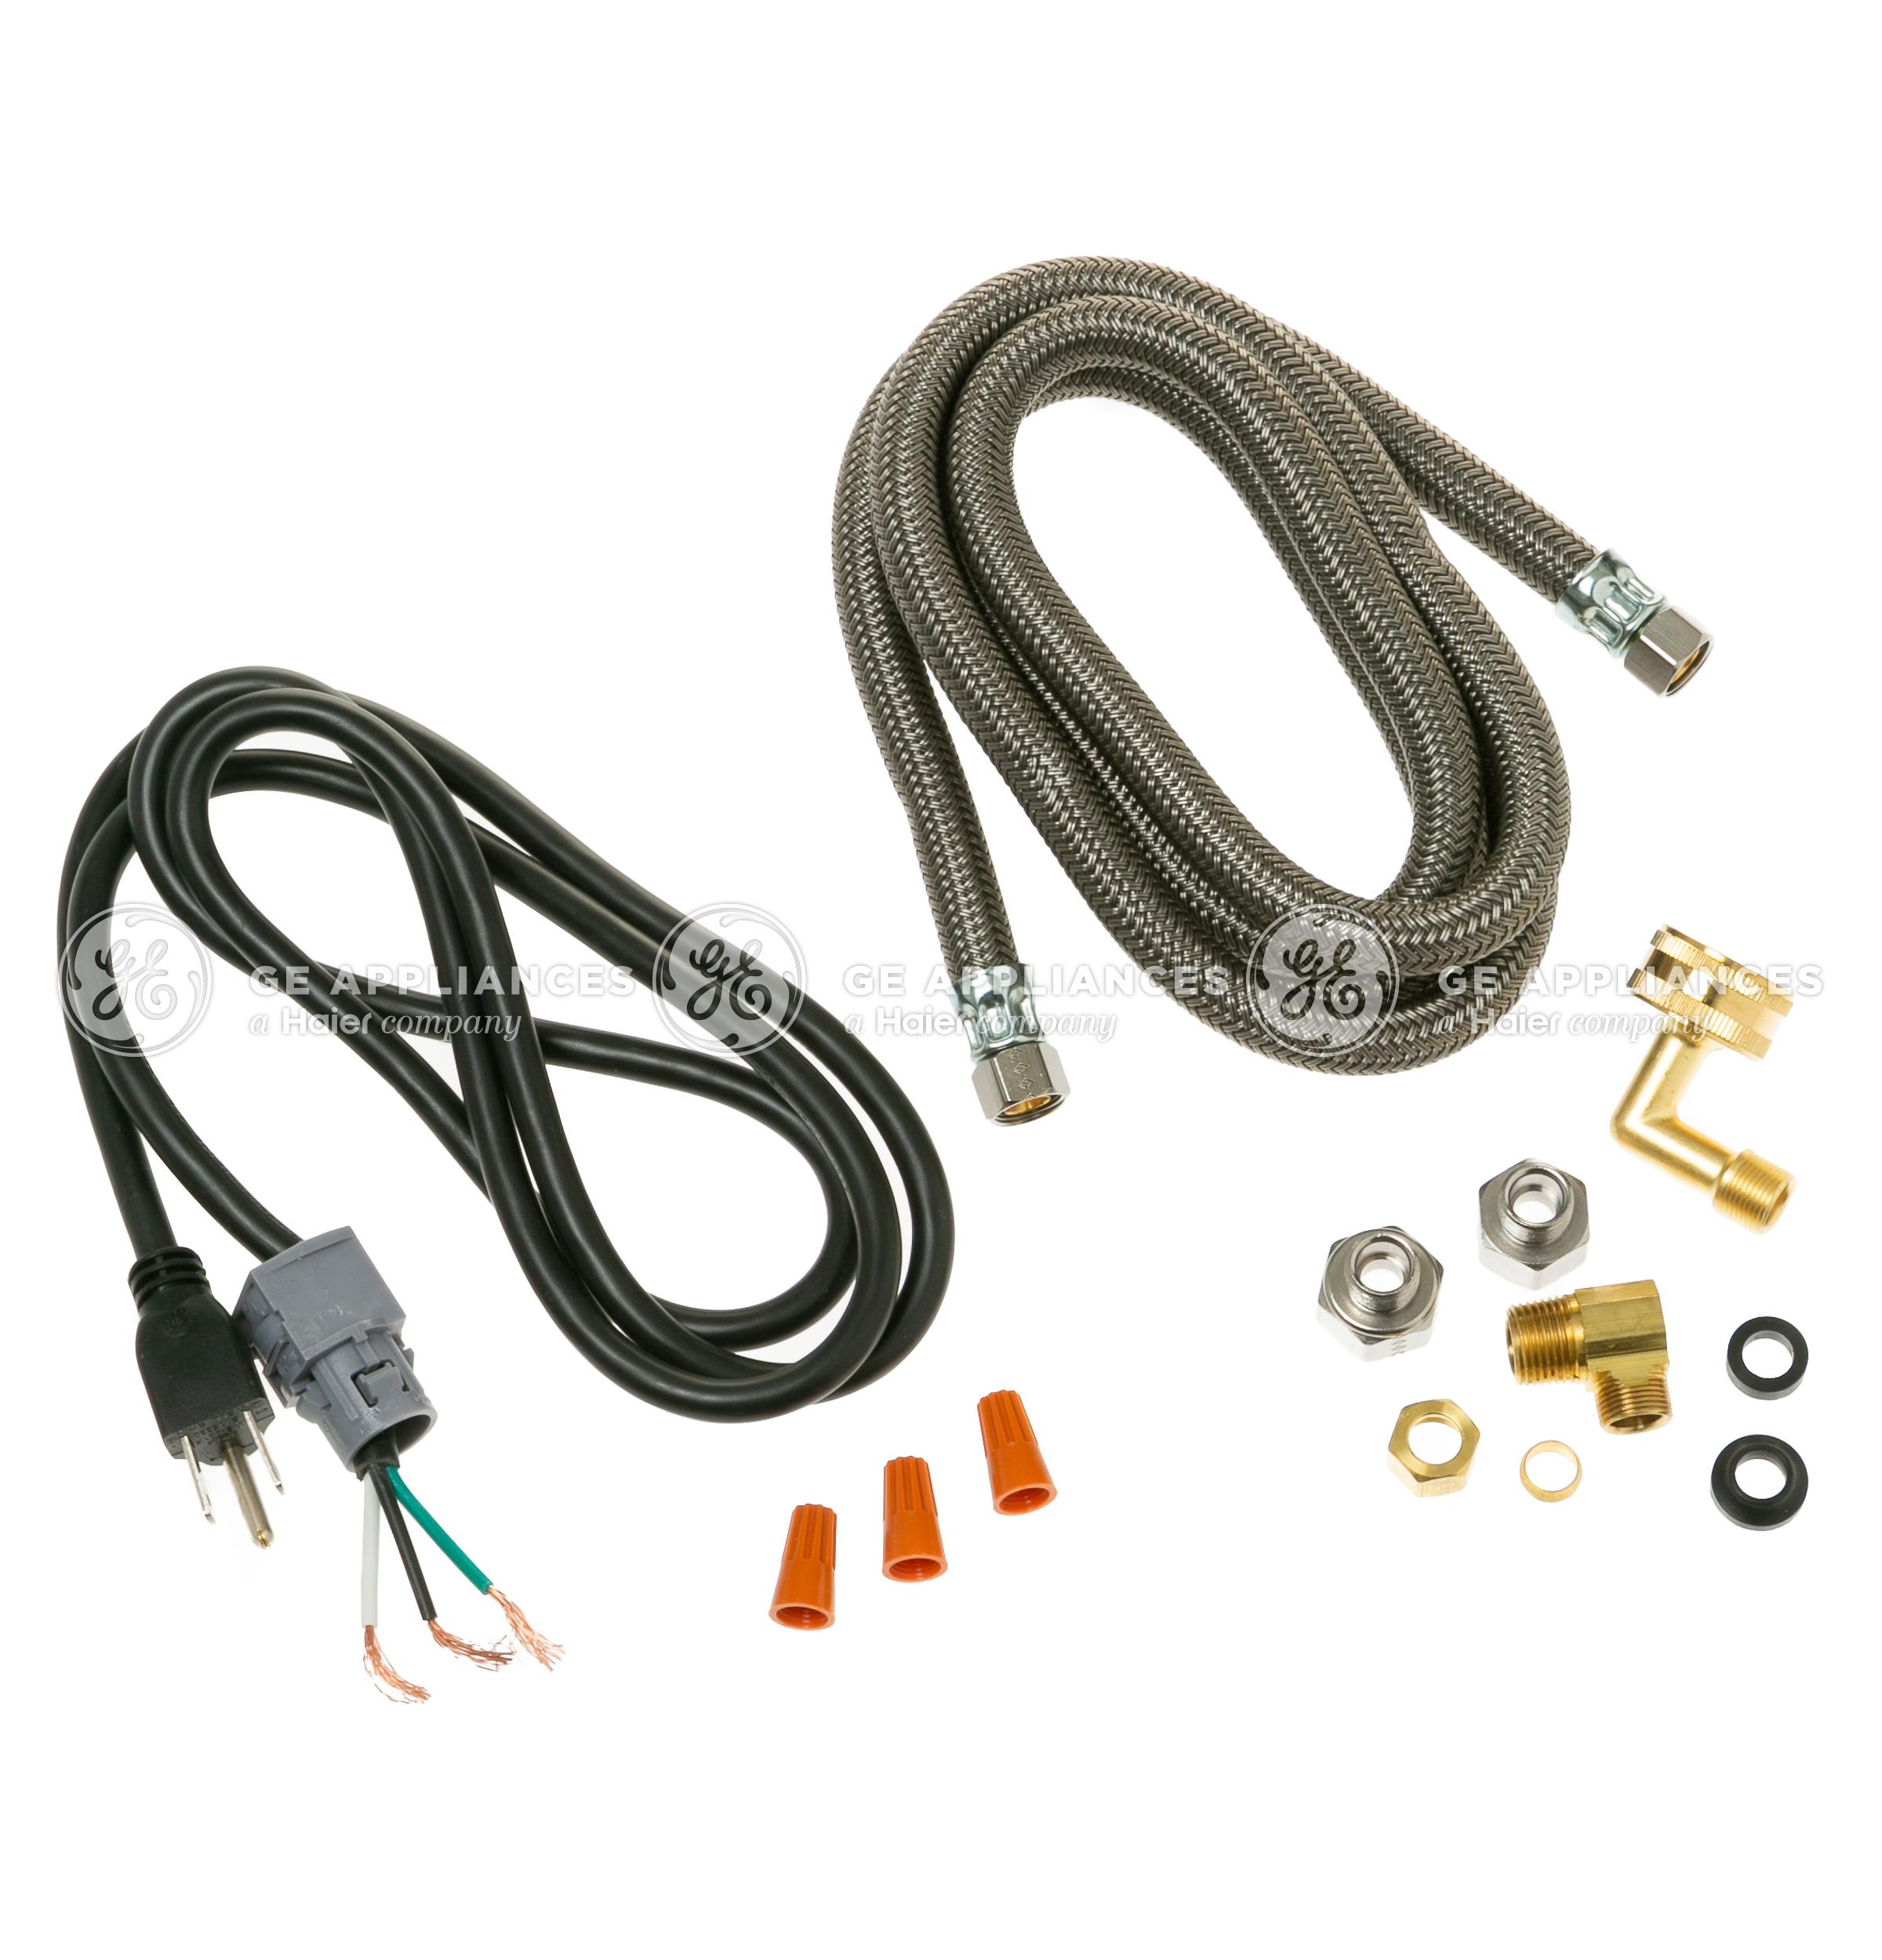 Ge Appliances DISHWASHER CONNECTION AND POWER CORD KIT